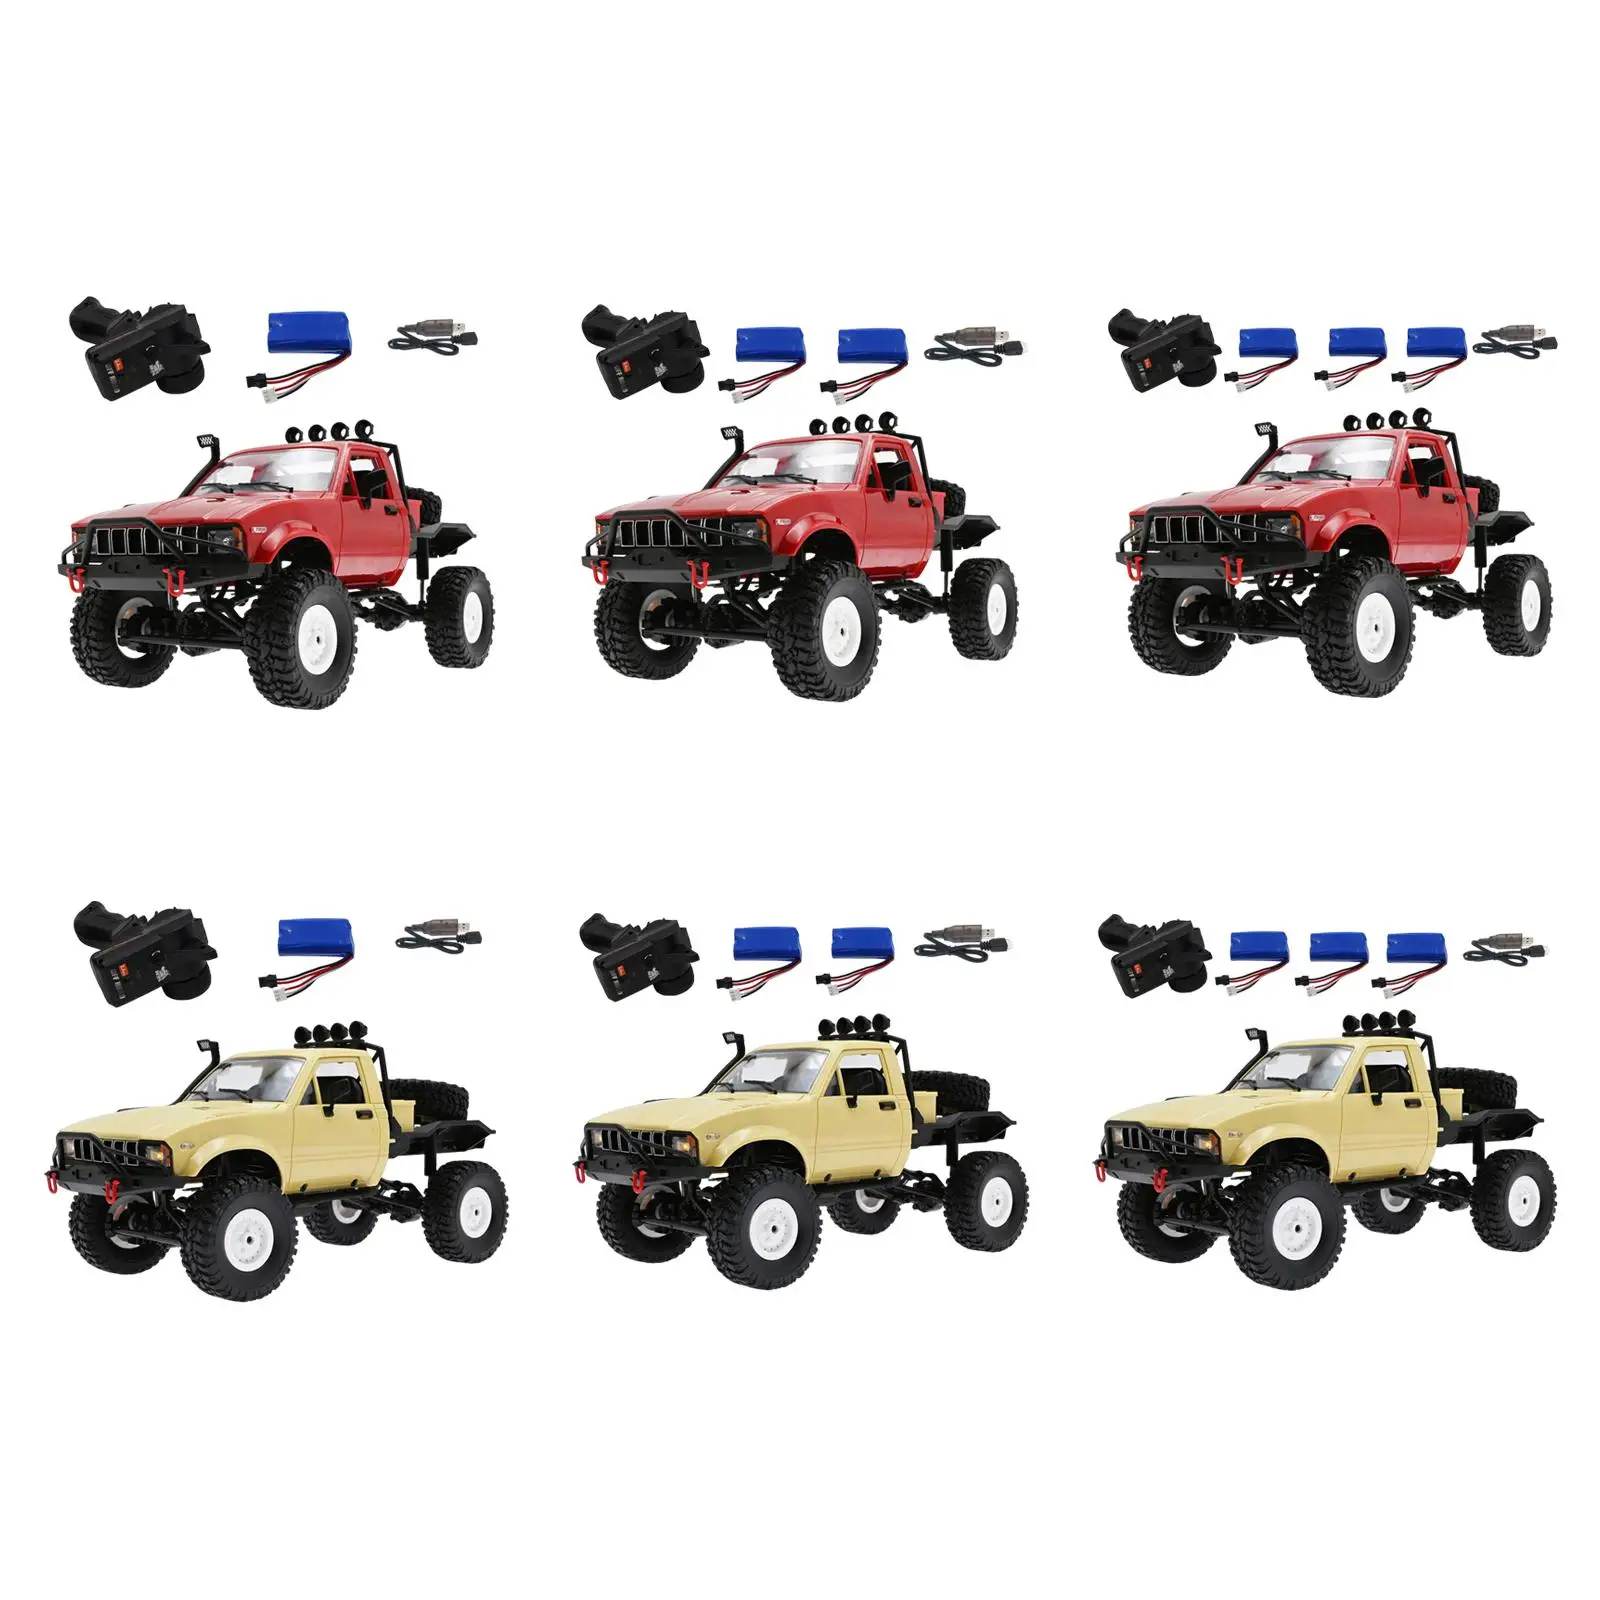 1/16 RC Truck C14 Rock Crawler 4CH 2.4GHz 4WD Remote Control Car for WPL Racing Vehicle All Terrain Car Kids Gift Model